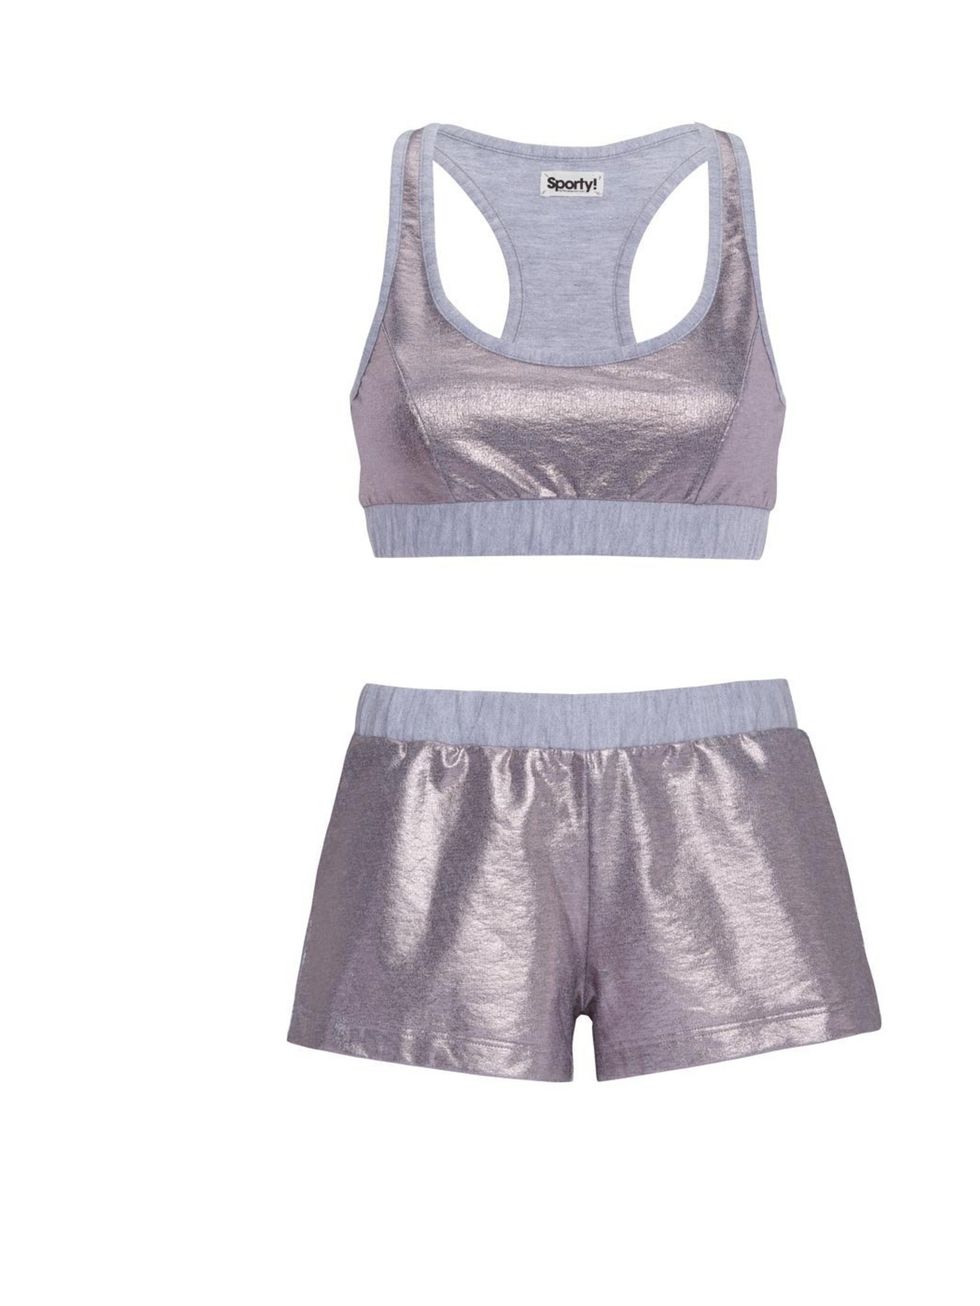 <p>Inject a little fun into your workout wardrobe with the new Sporty! Collection by lingerie brand Princesse Tam Tam. Layer this silver crop top and shorts over leggings and under a long-sleeve top until the weather heats up. </p><p>Argent silver crop to